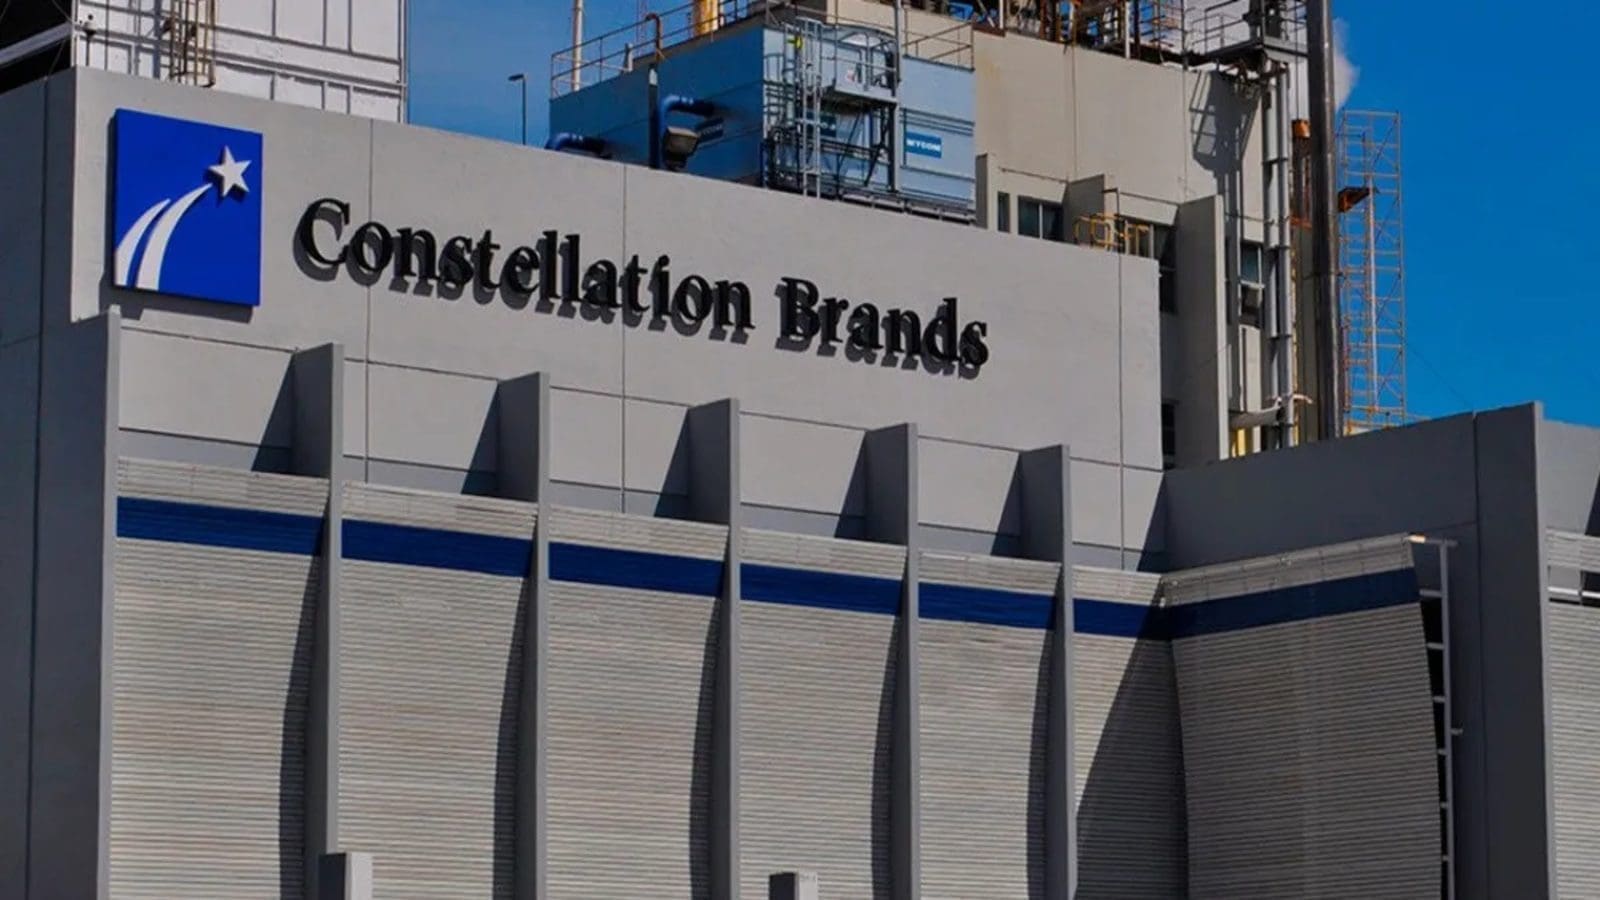 Constellation Brands’ expansion plans receives backing from Mexican government